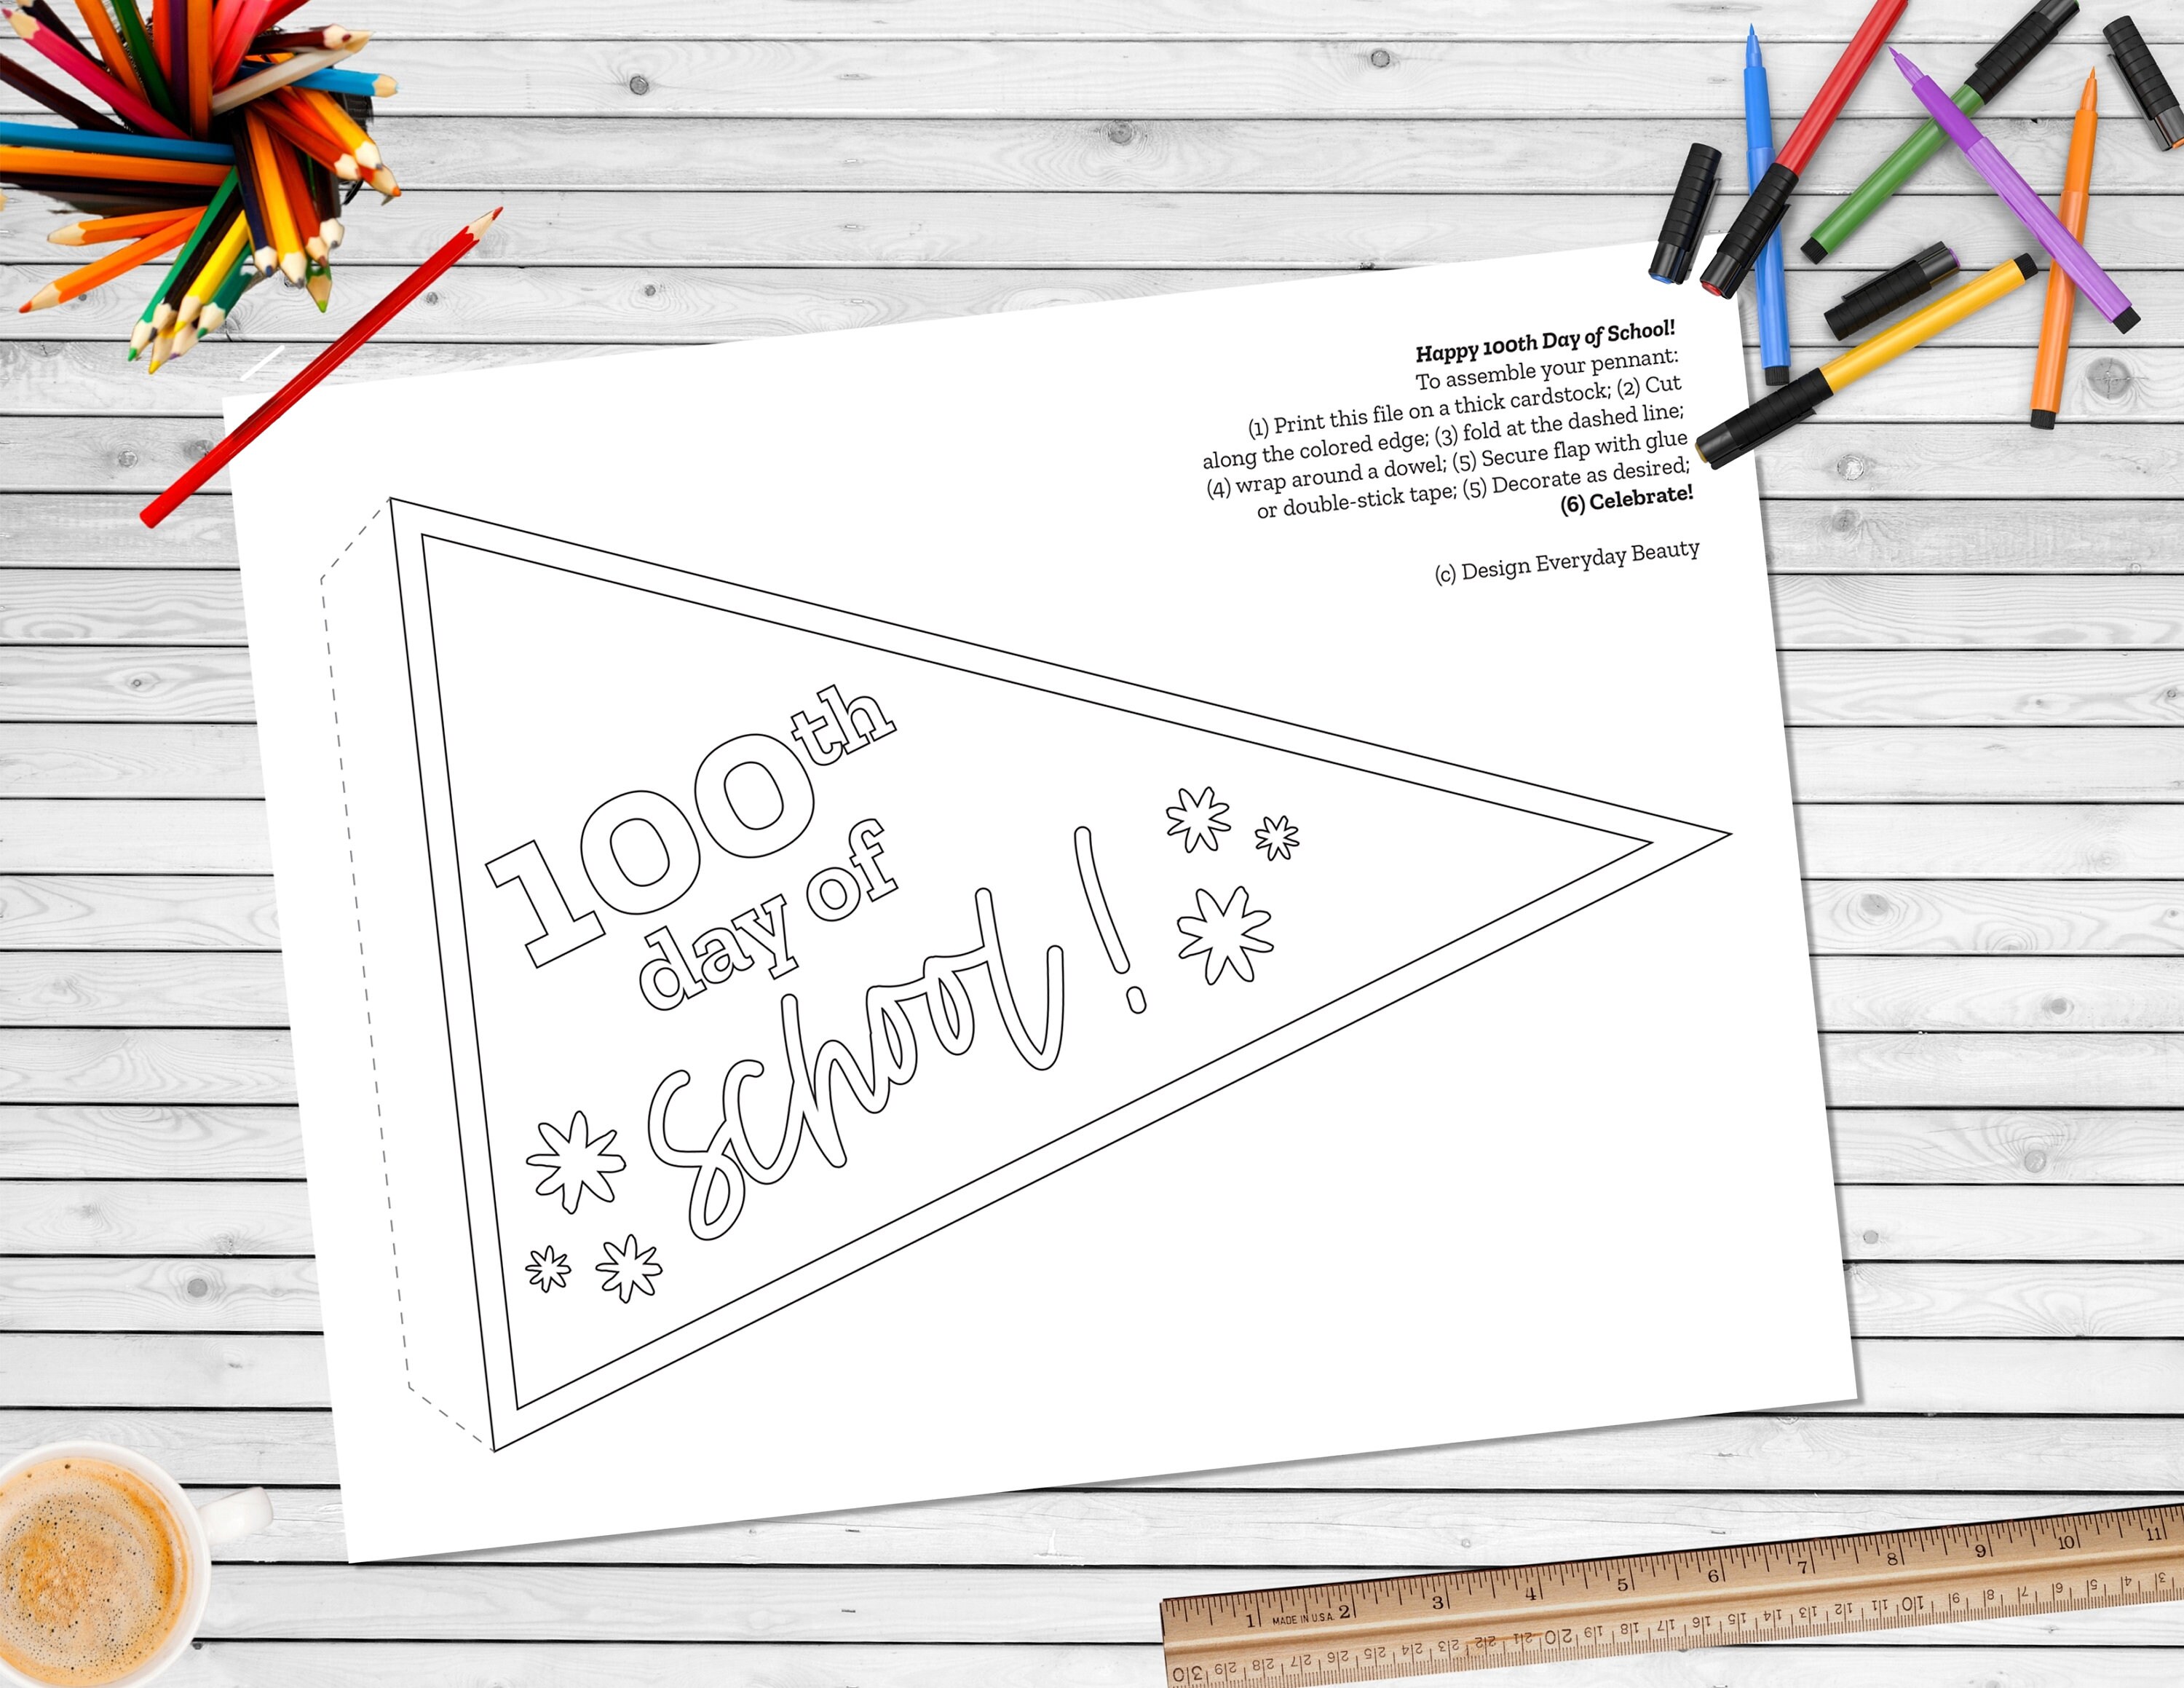 Th day of school pennant flag coloring page activity celebrate days of school printable pennant flags for classroom celebration